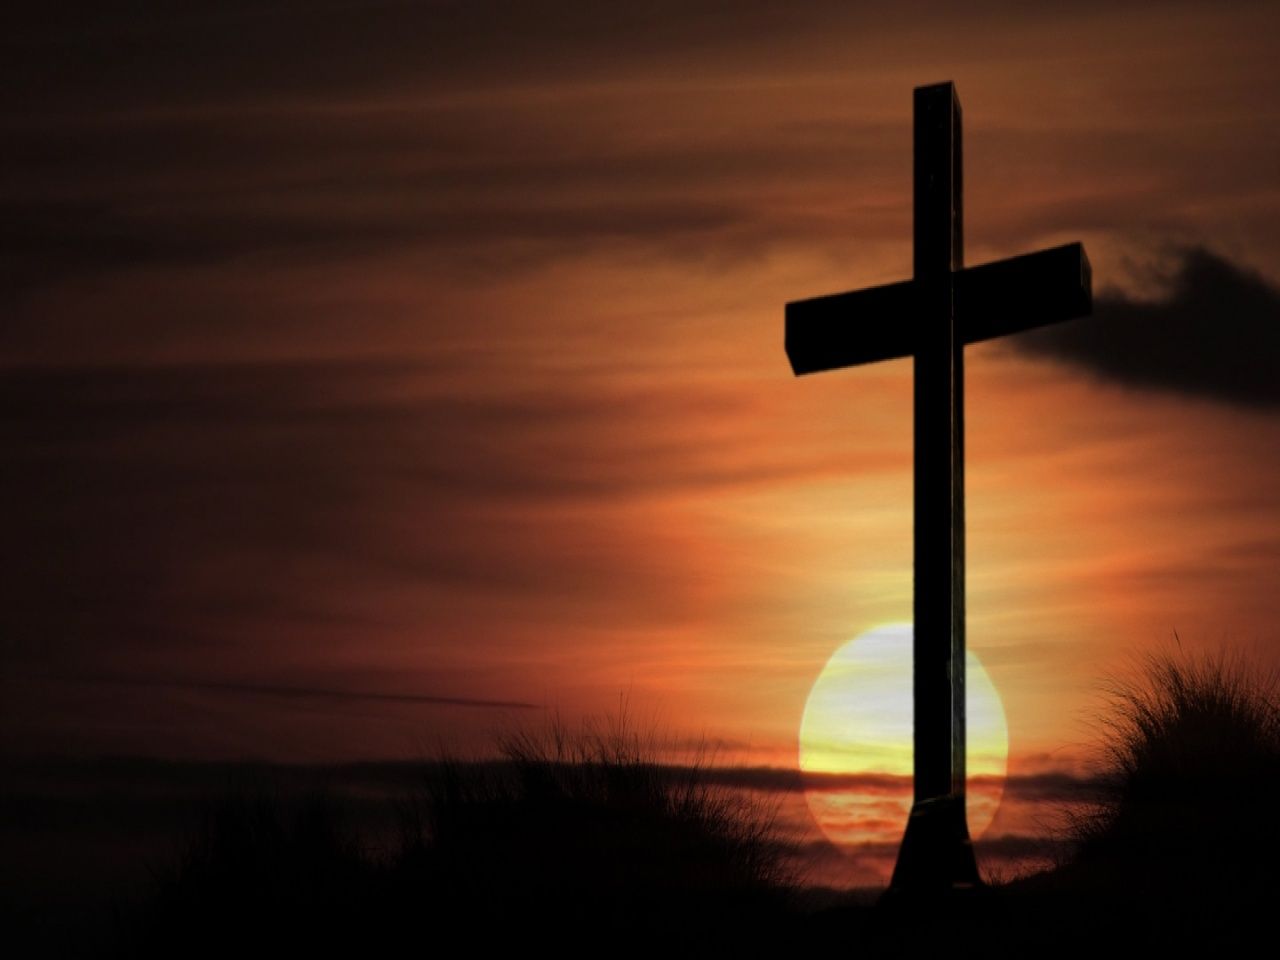 Cross in front of a sunset - Cross